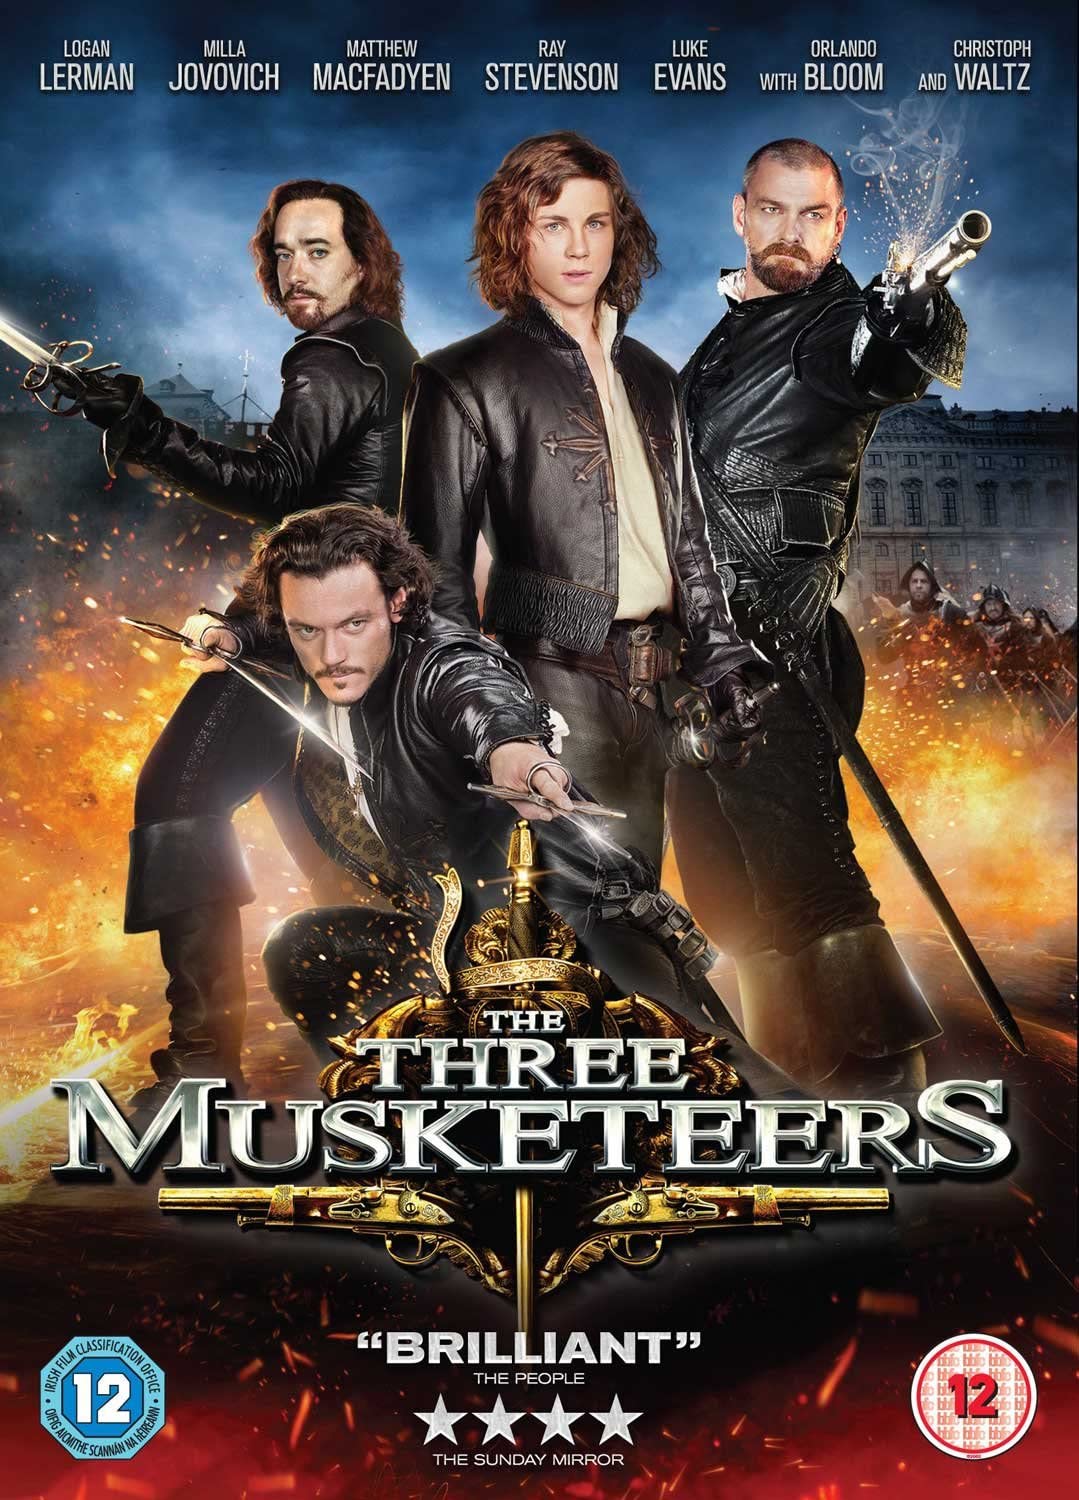 The Three Musketeers - Adventure/Action [DVD]